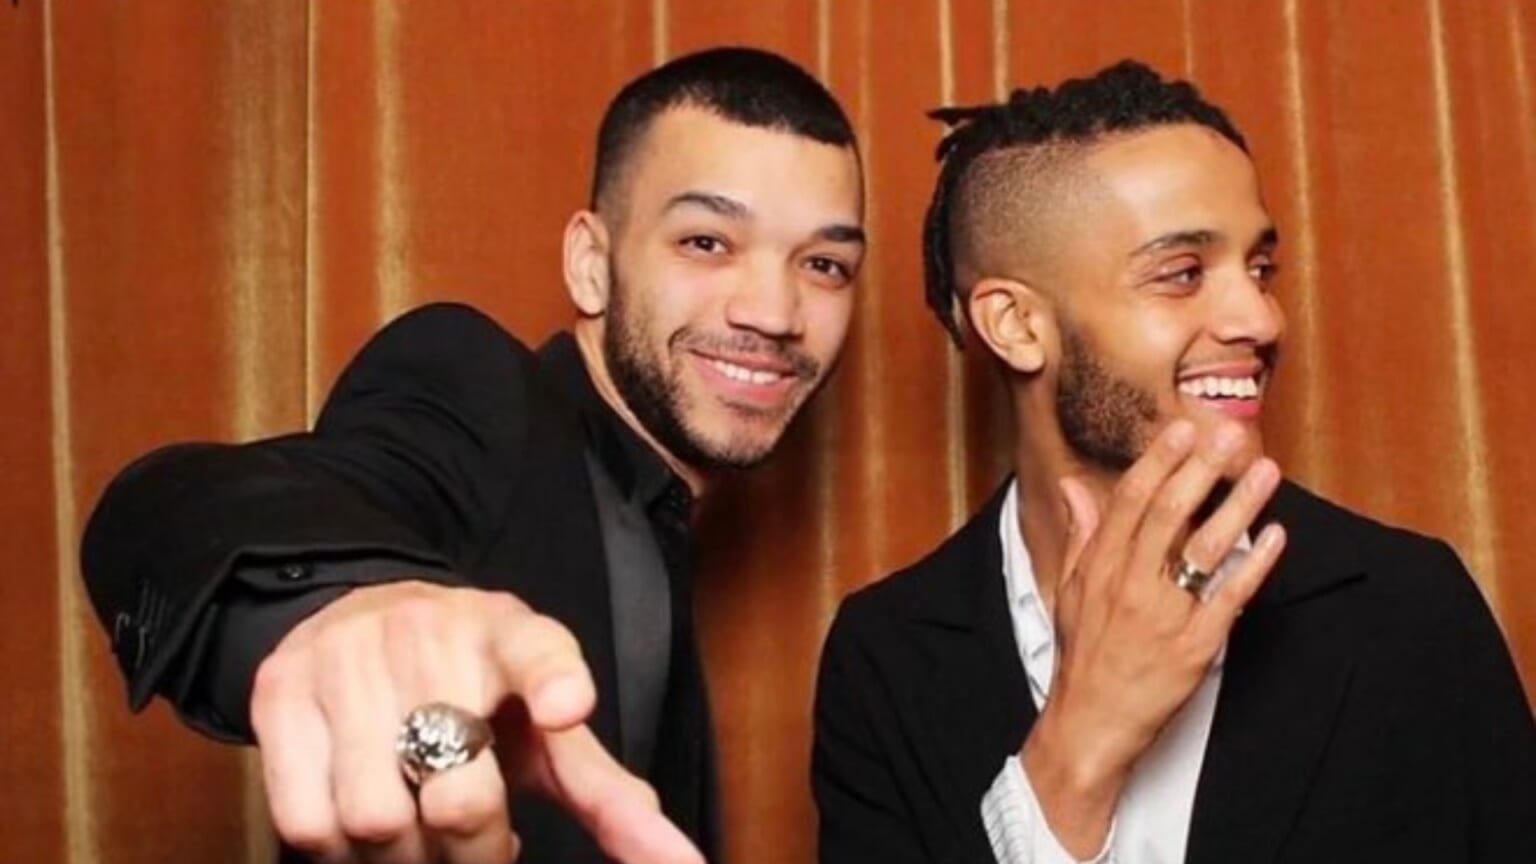 Queen Sugar Star Nicholas Ashe Comes Out In Relationship With Justice Smith